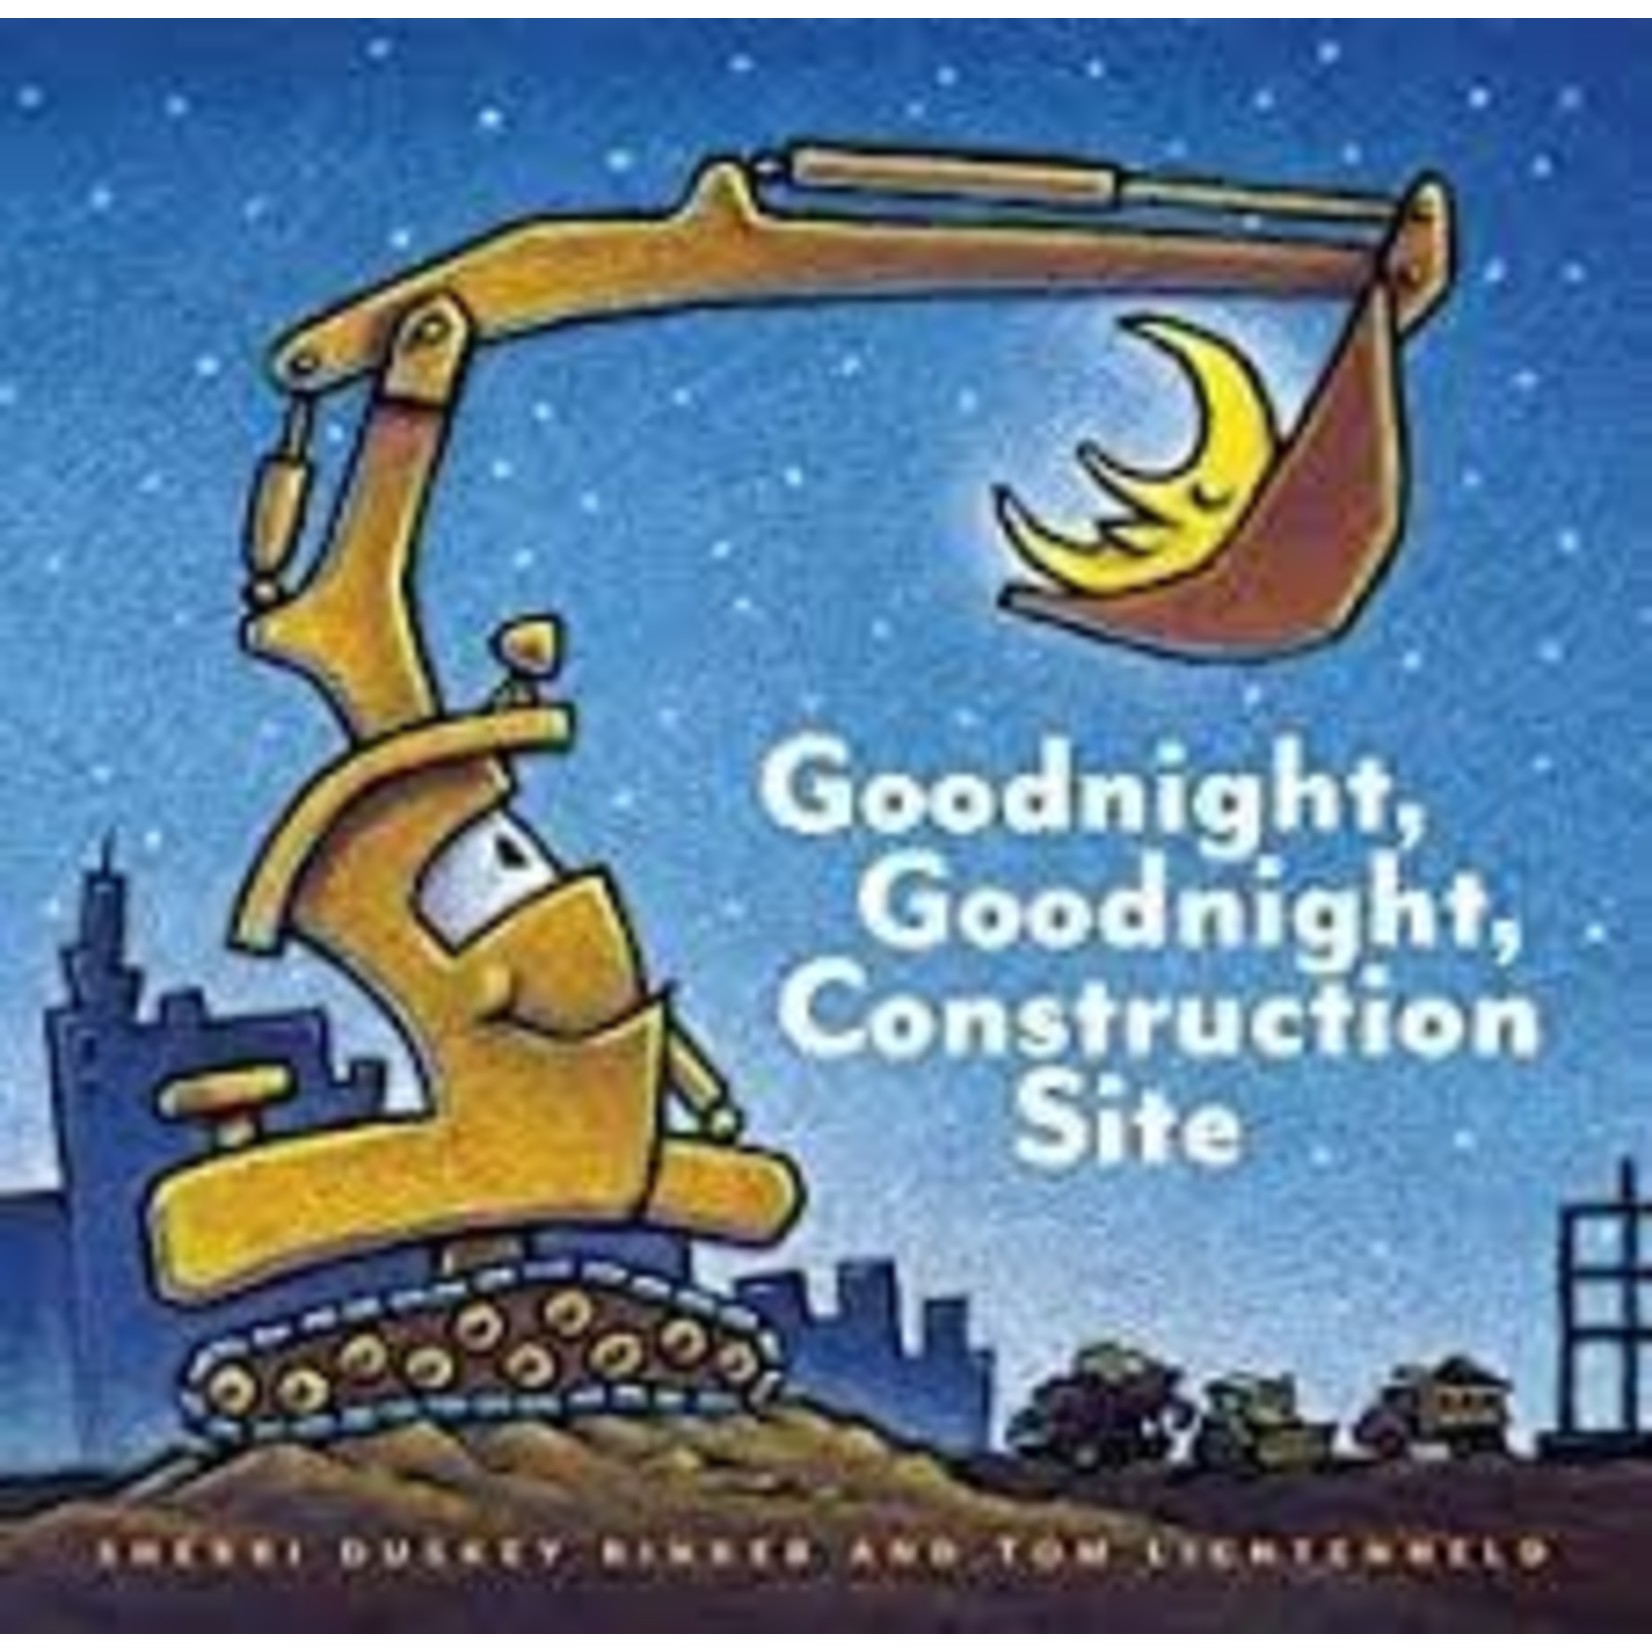 Chronicle Books Goodnight Goodnight Construction SIte Book